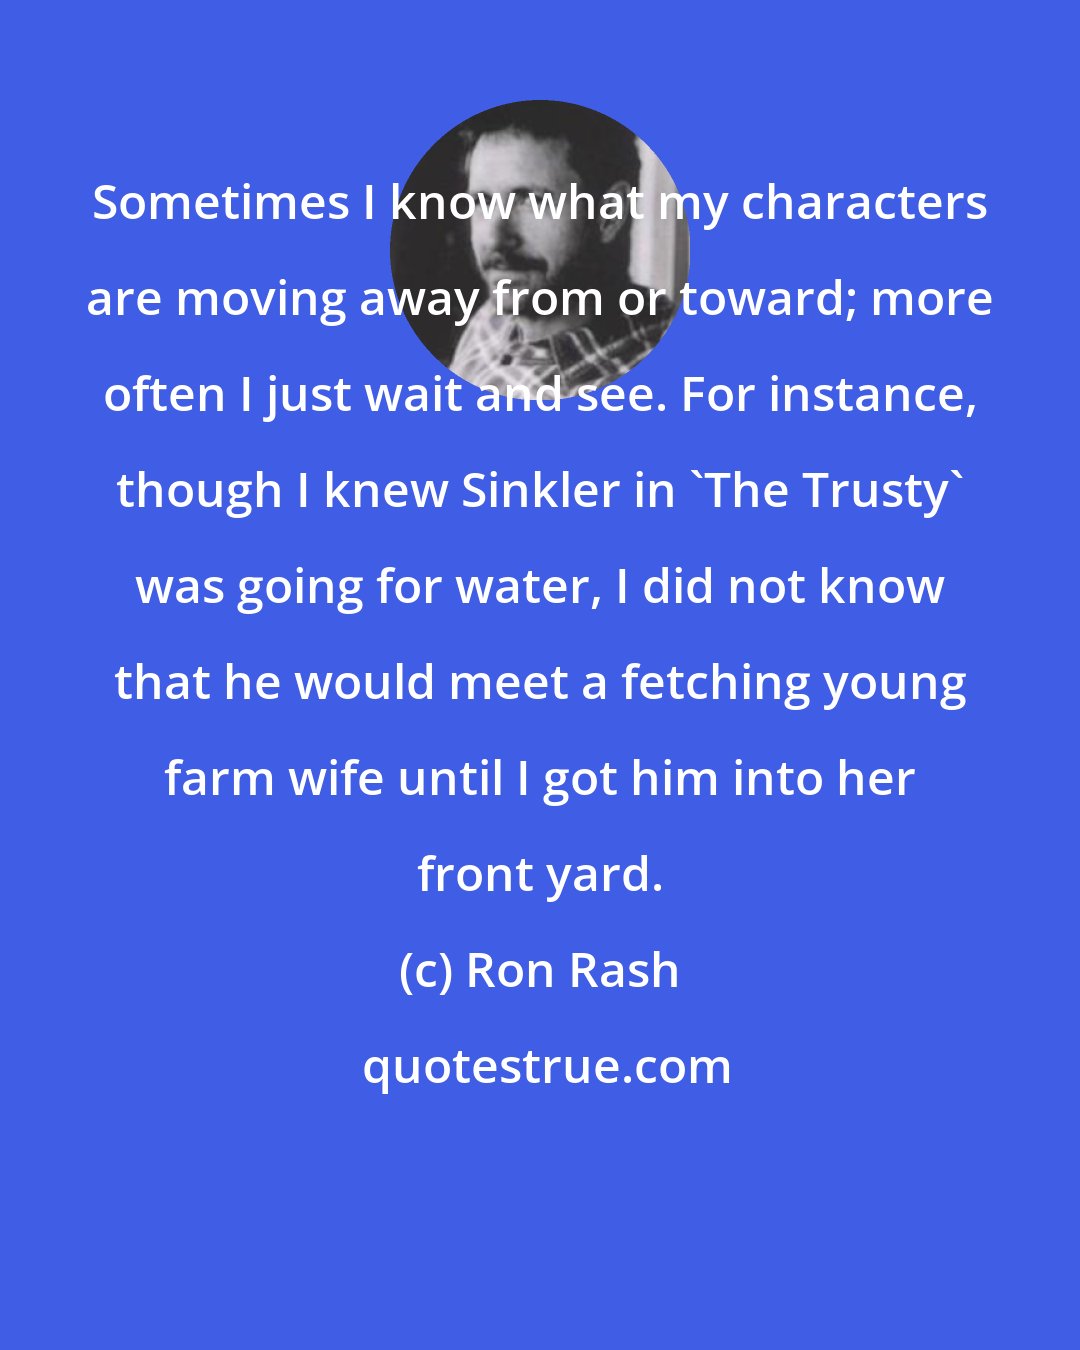 Ron Rash: Sometimes I know what my characters are moving away from or toward; more often I just wait and see. For instance, though I knew Sinkler in 'The Trusty' was going for water, I did not know that he would meet a fetching young farm wife until I got him into her front yard.